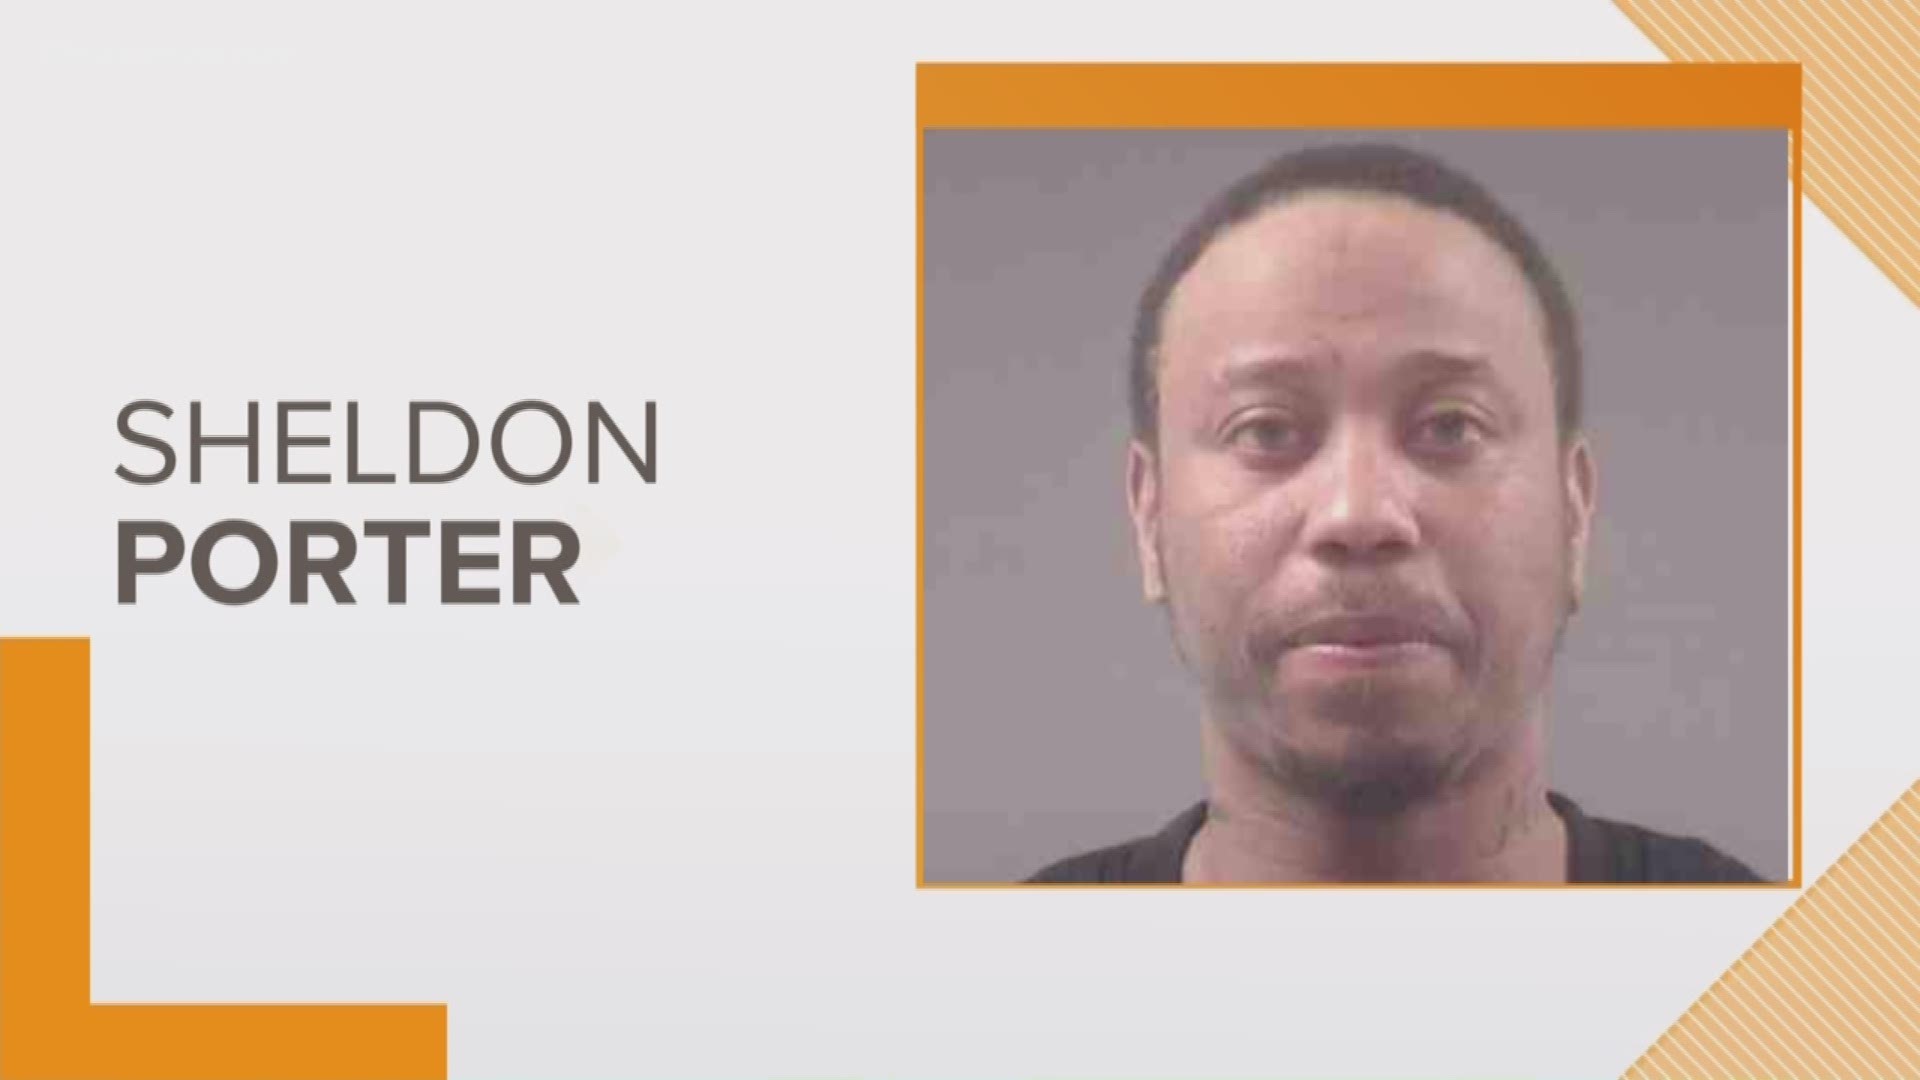 Sheldon Porter was convicted of two counts of second-degree murder following a jury trial.